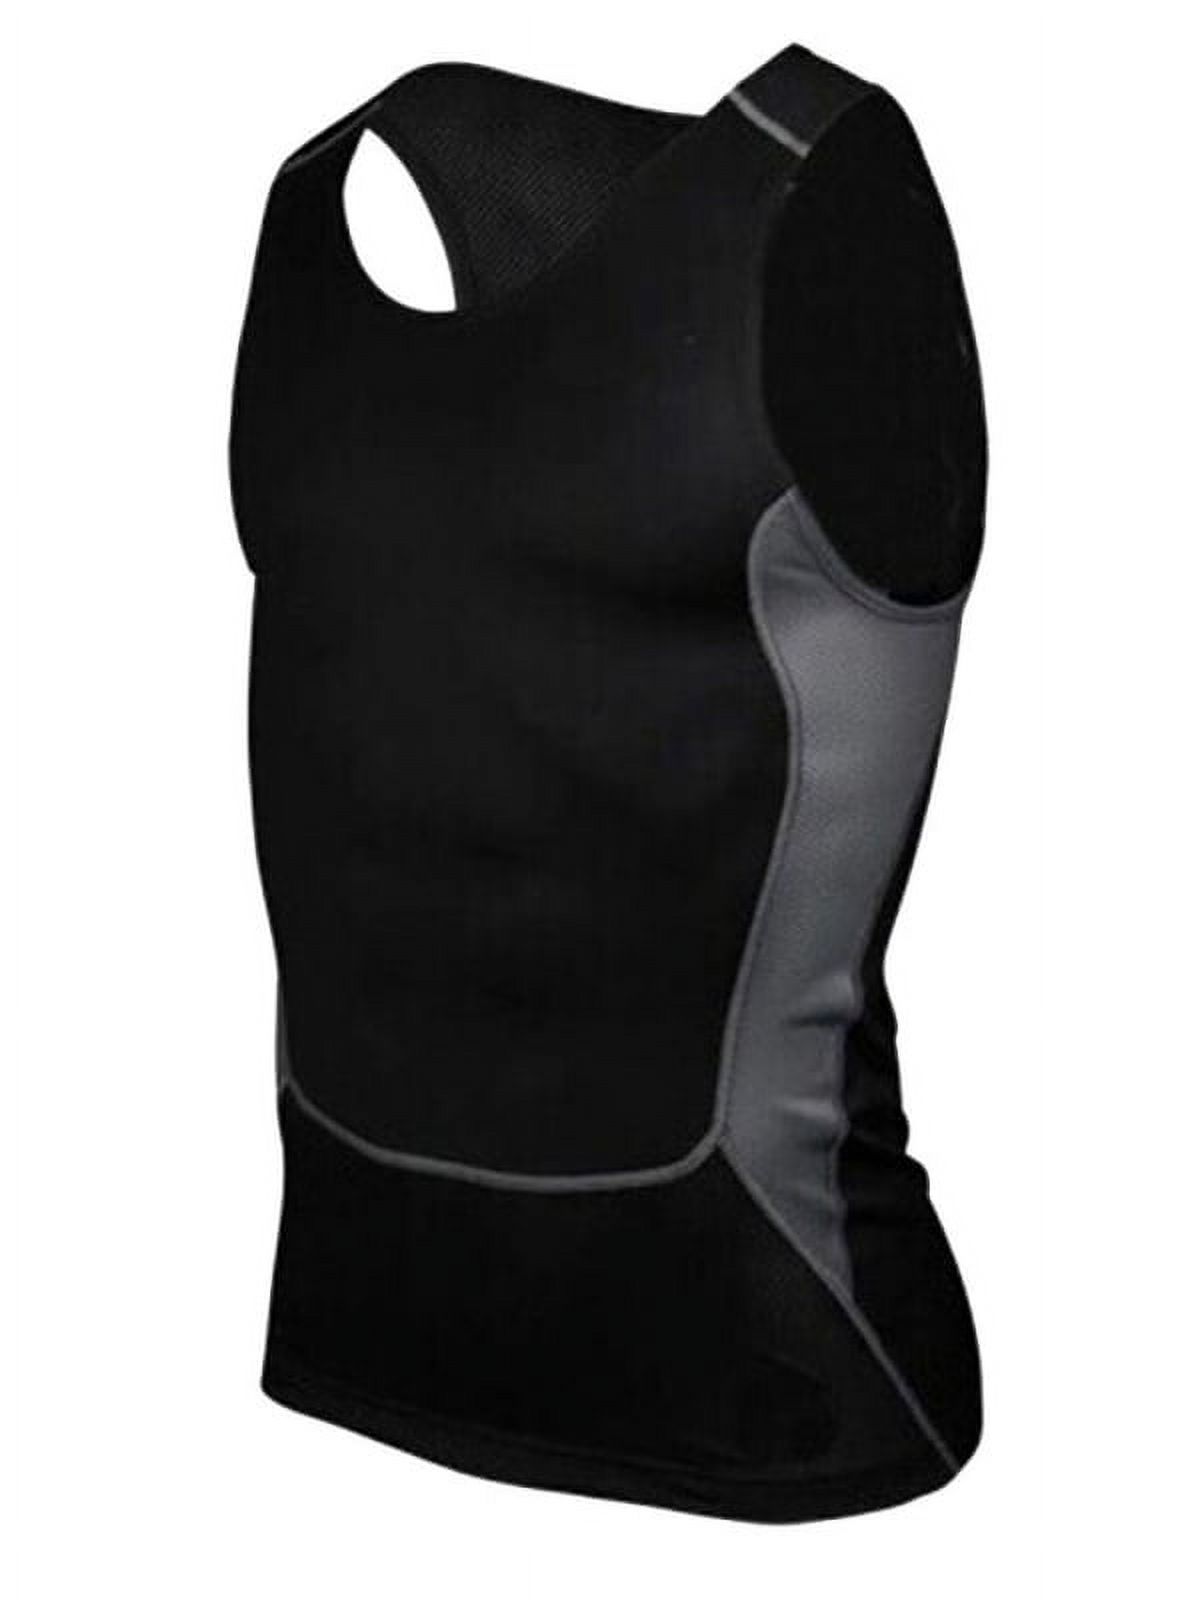 Men Gym Running Sports Compression Shirt Base Layer Tank Tops Sleeveless Vest - image 1 of 2